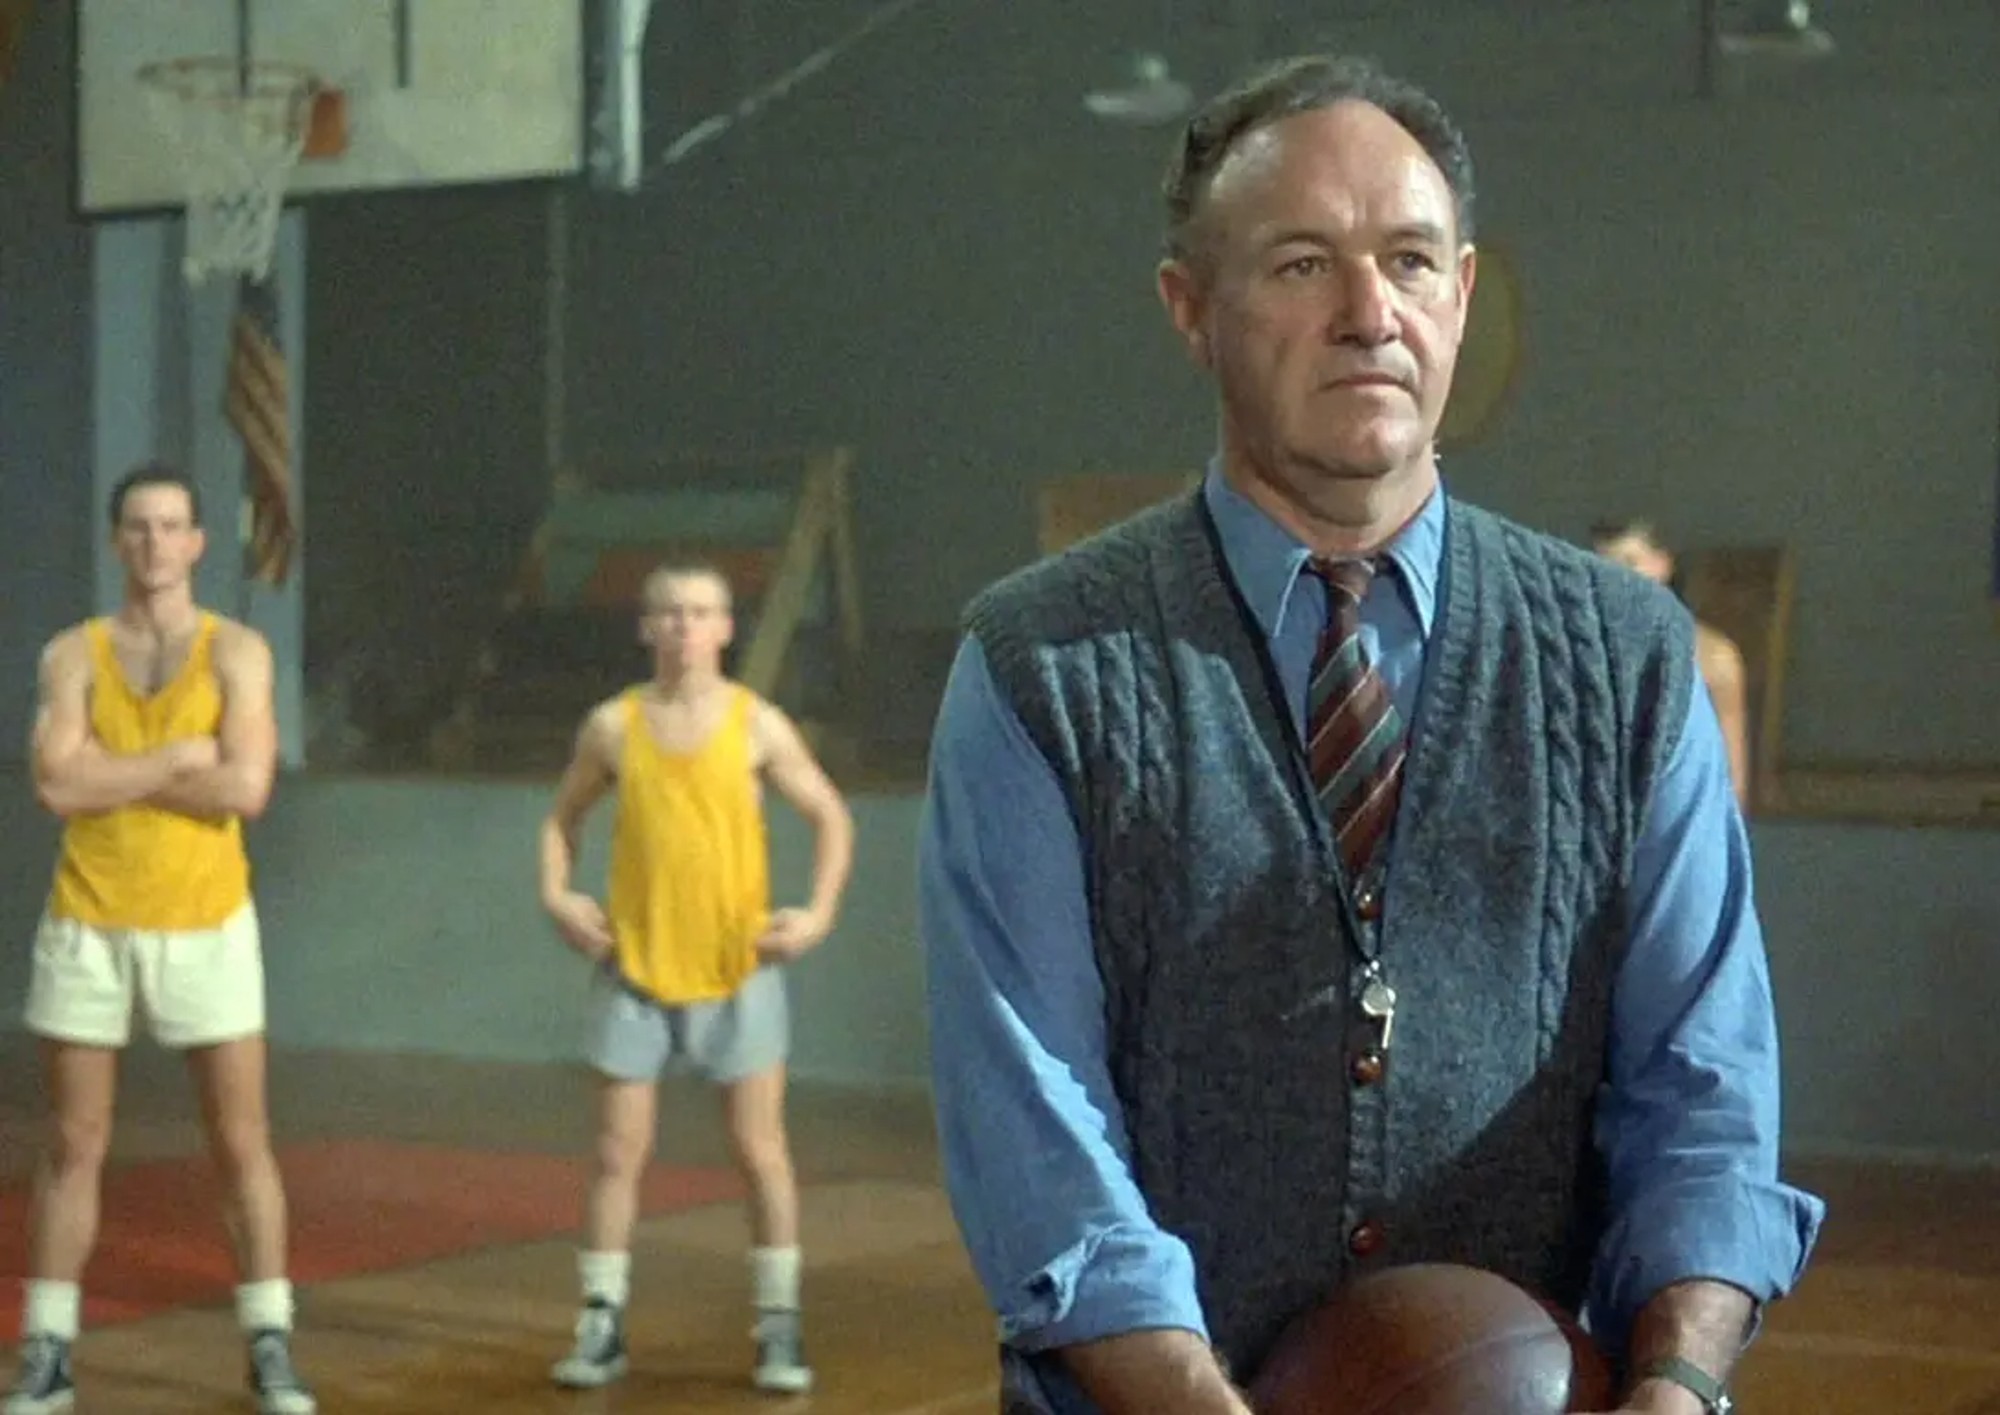 Image from the motion picture Hoosiers